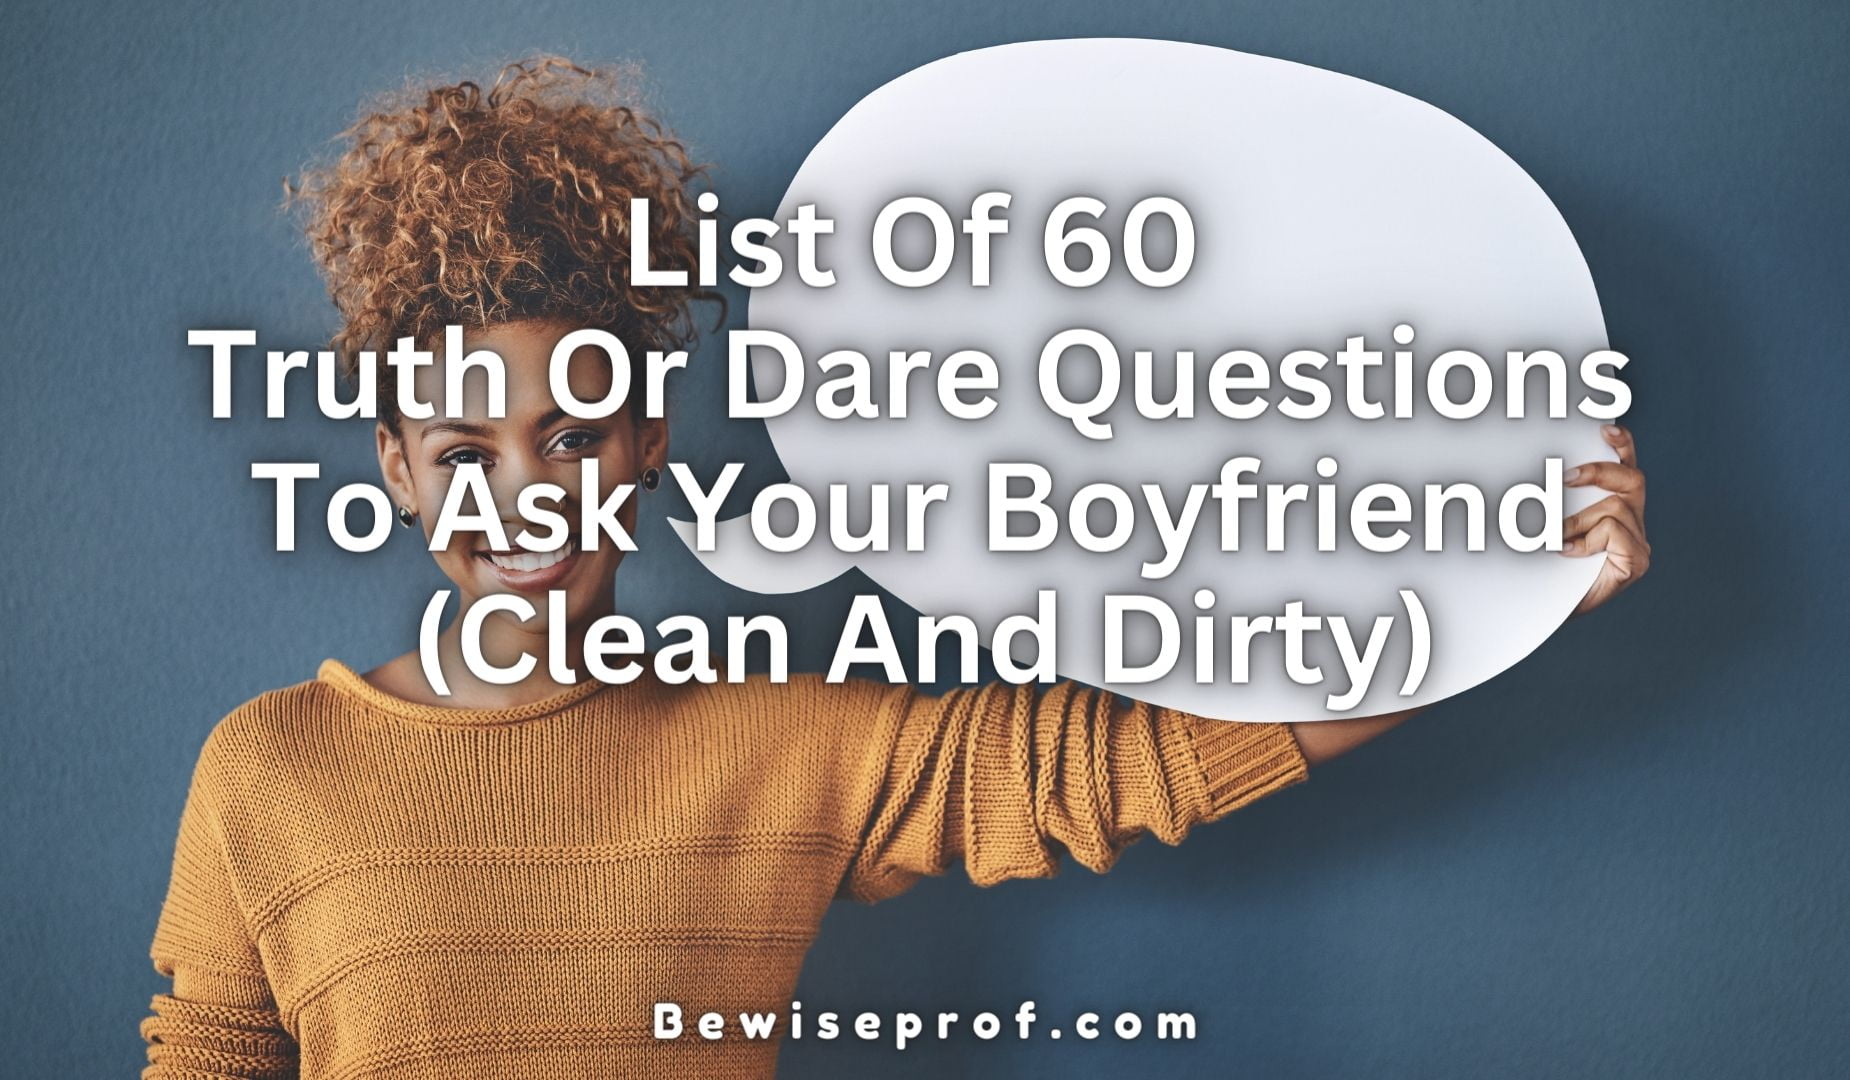 List Of 60 Truth Or Dare Questions To Ask Your Boyfriend (Clean And Dirty)